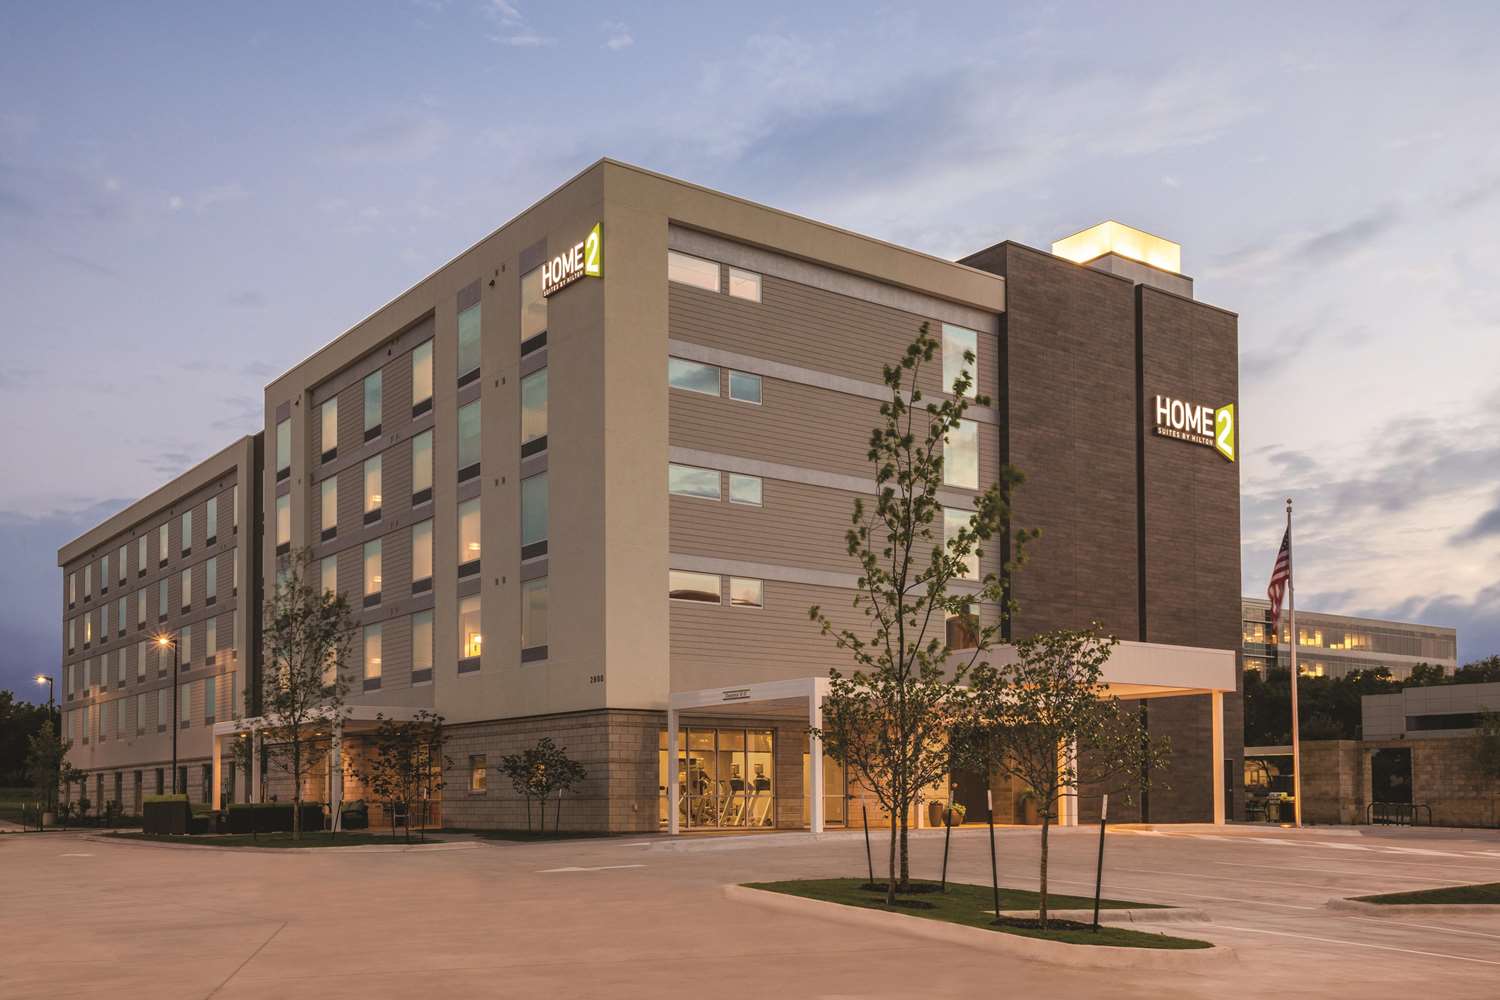 Pet Friendly Home2 Suites By Hilton Austin North/Near The Domain in Austin, Texas